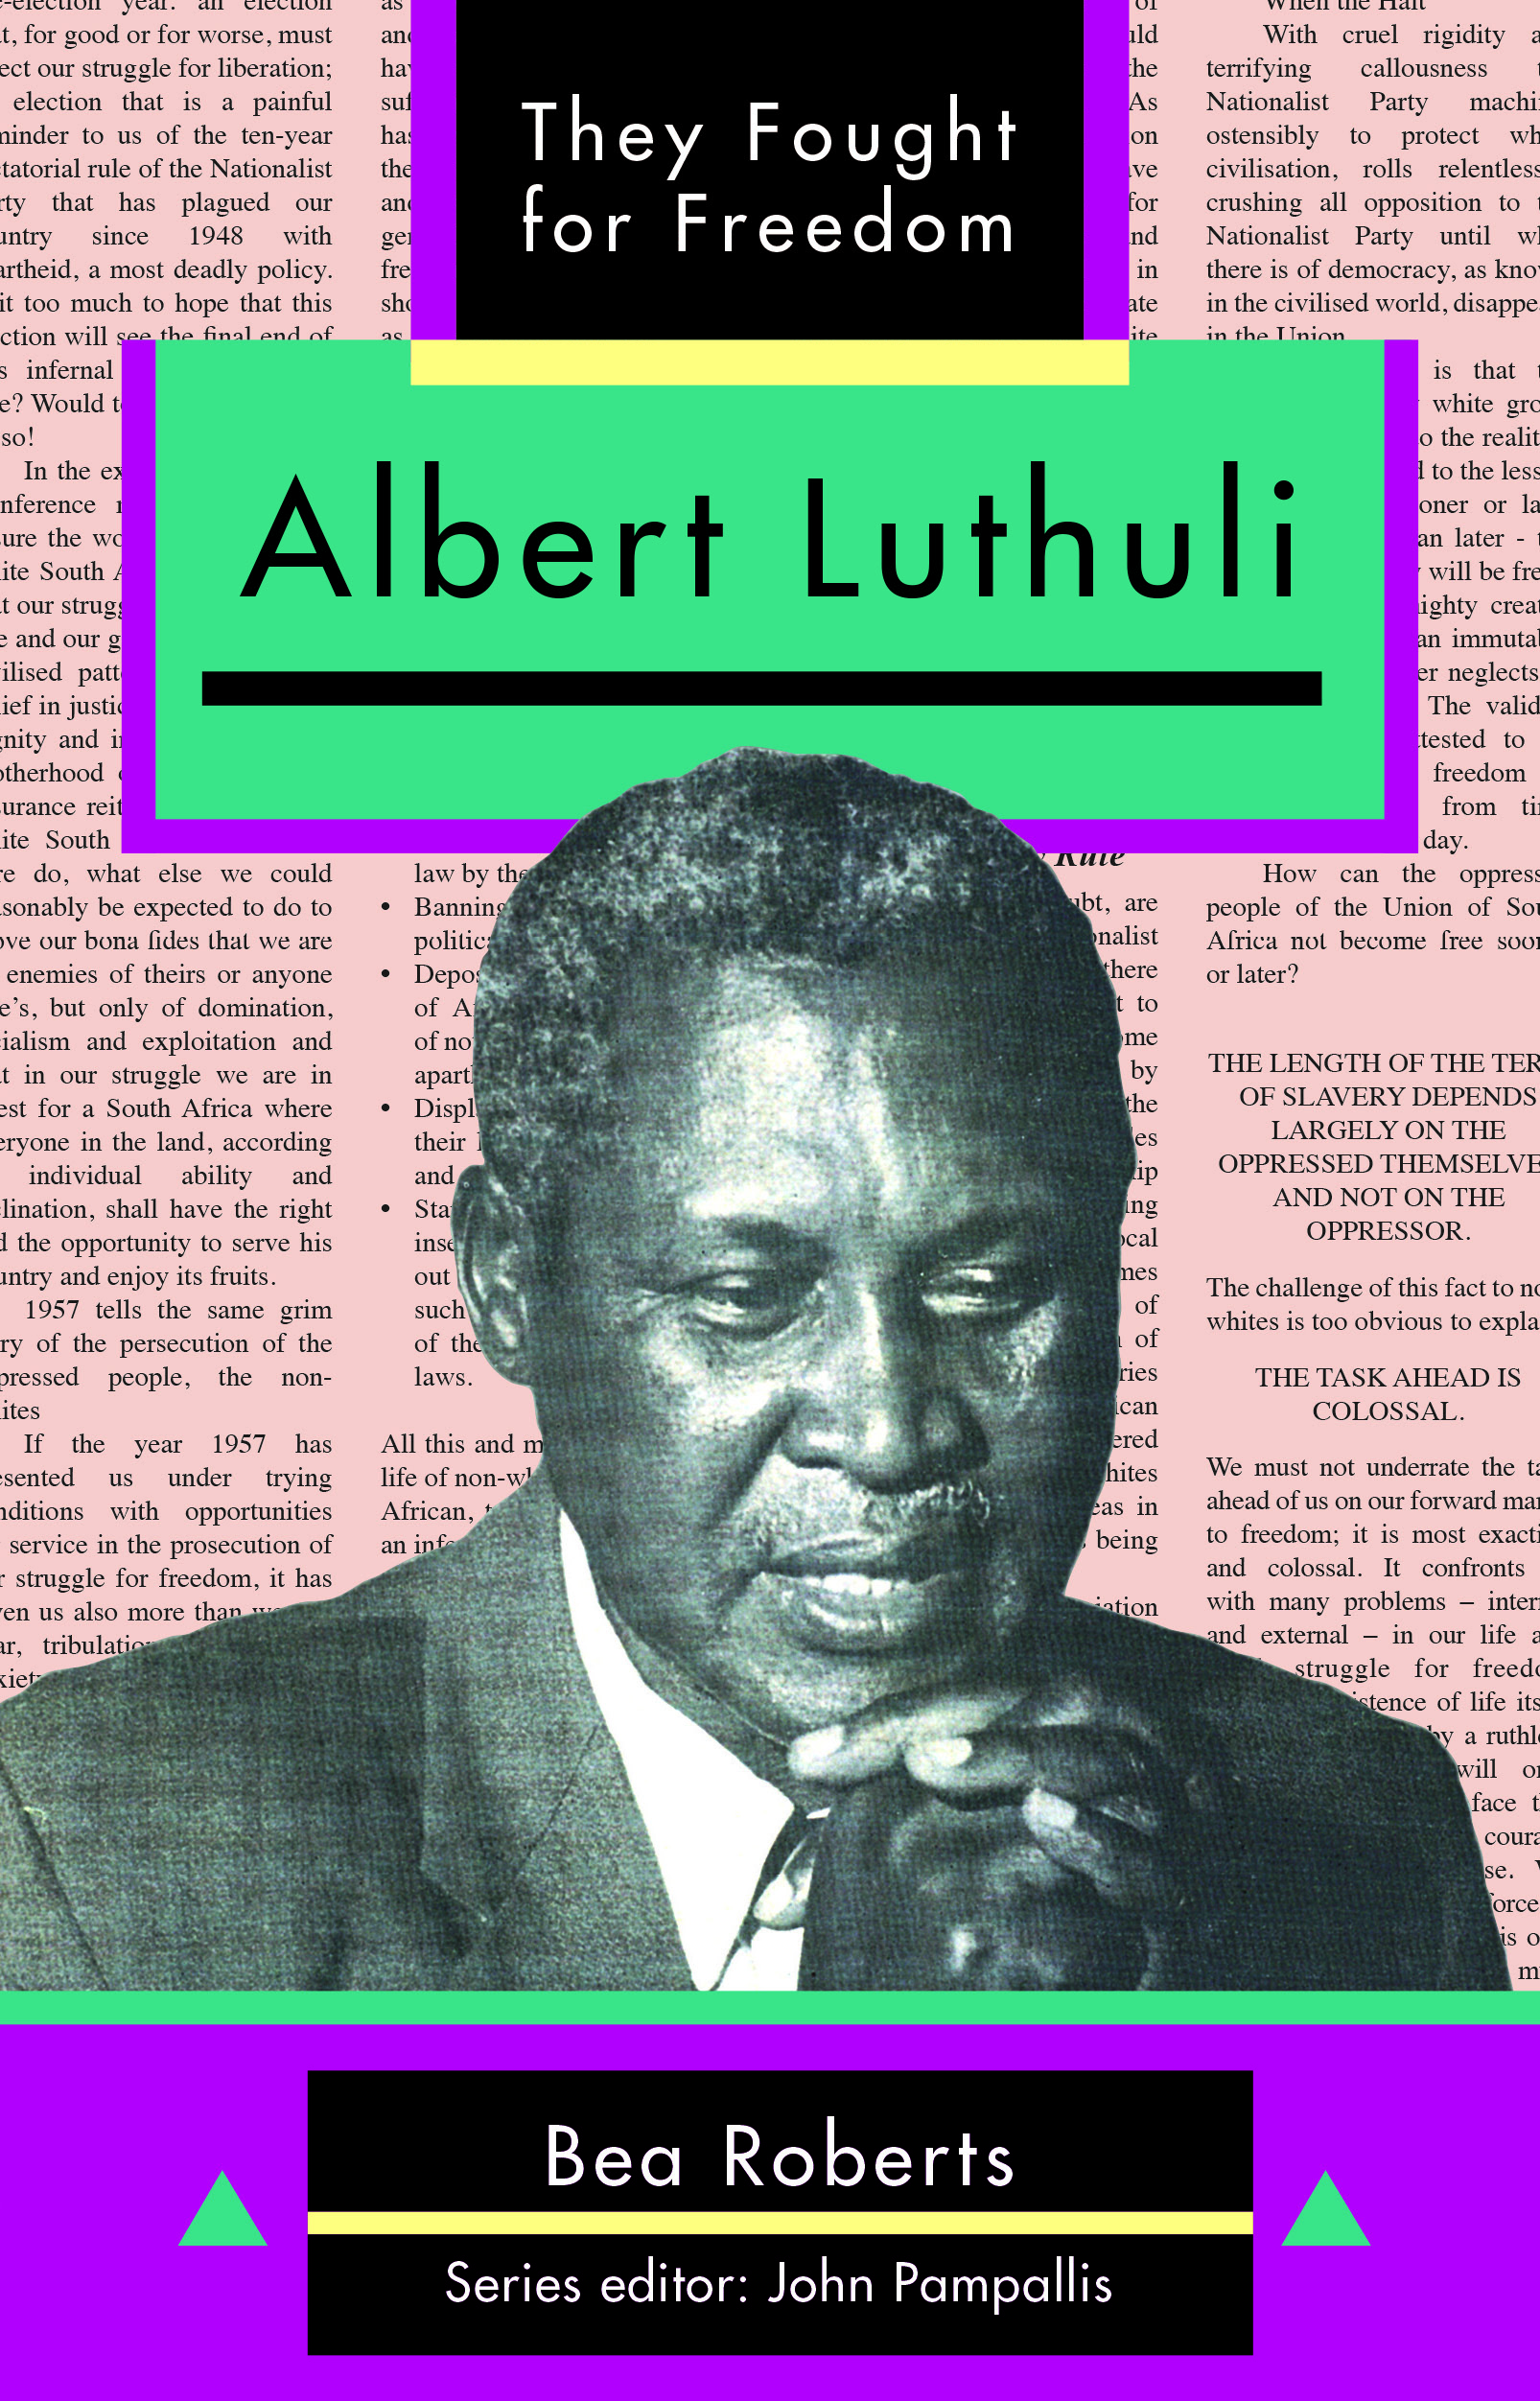 Picture of Albert Luthuli